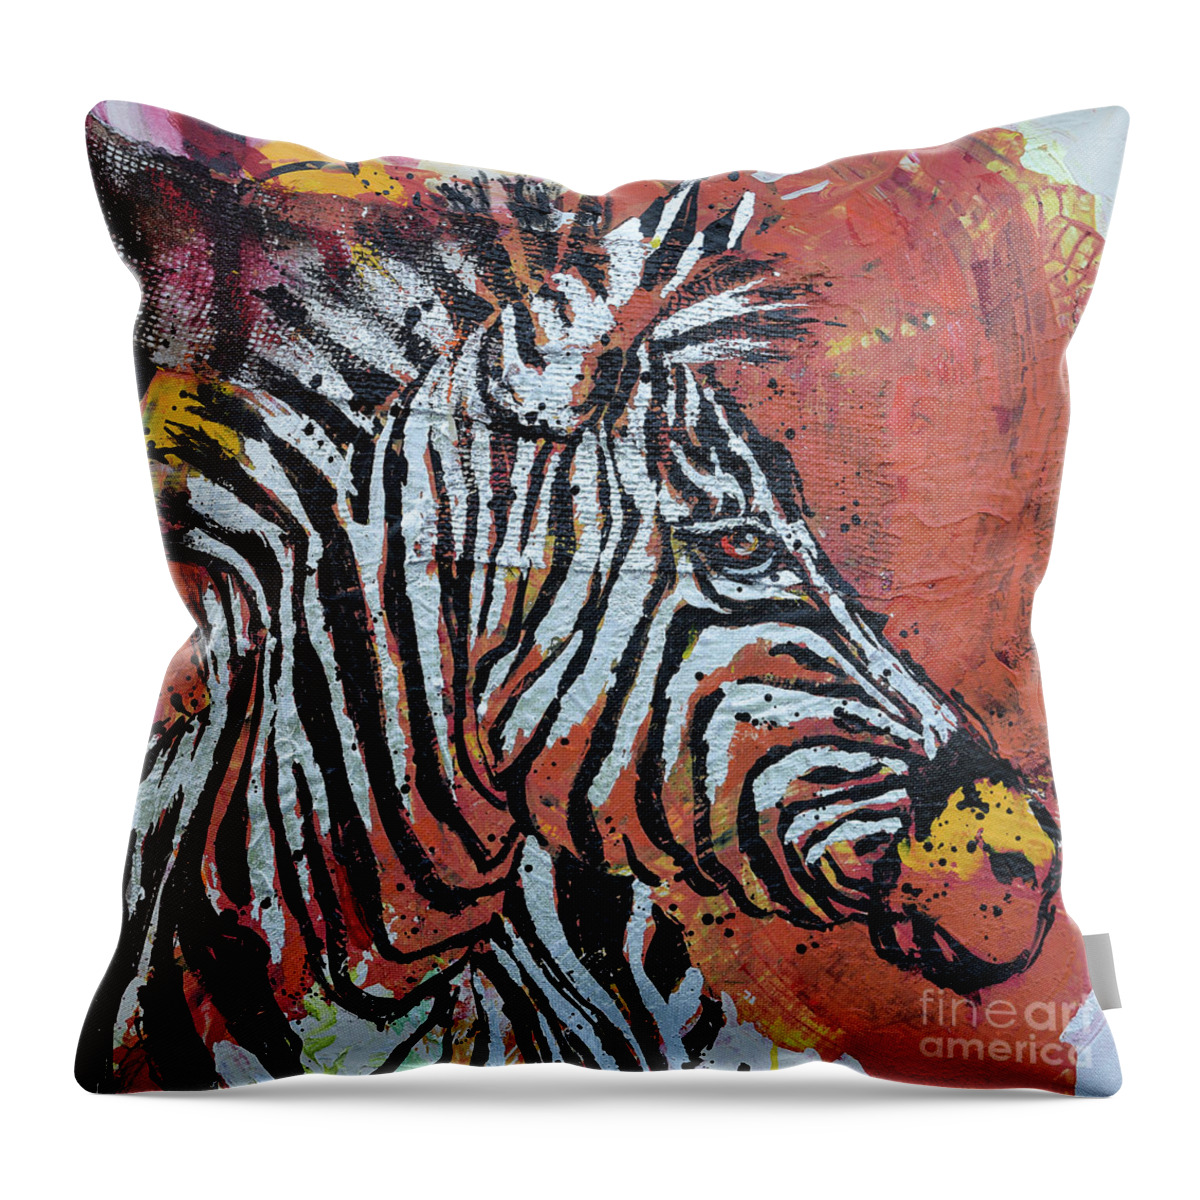  Throw Pillow featuring the painting Watchful Zebra by Jyotika Shroff